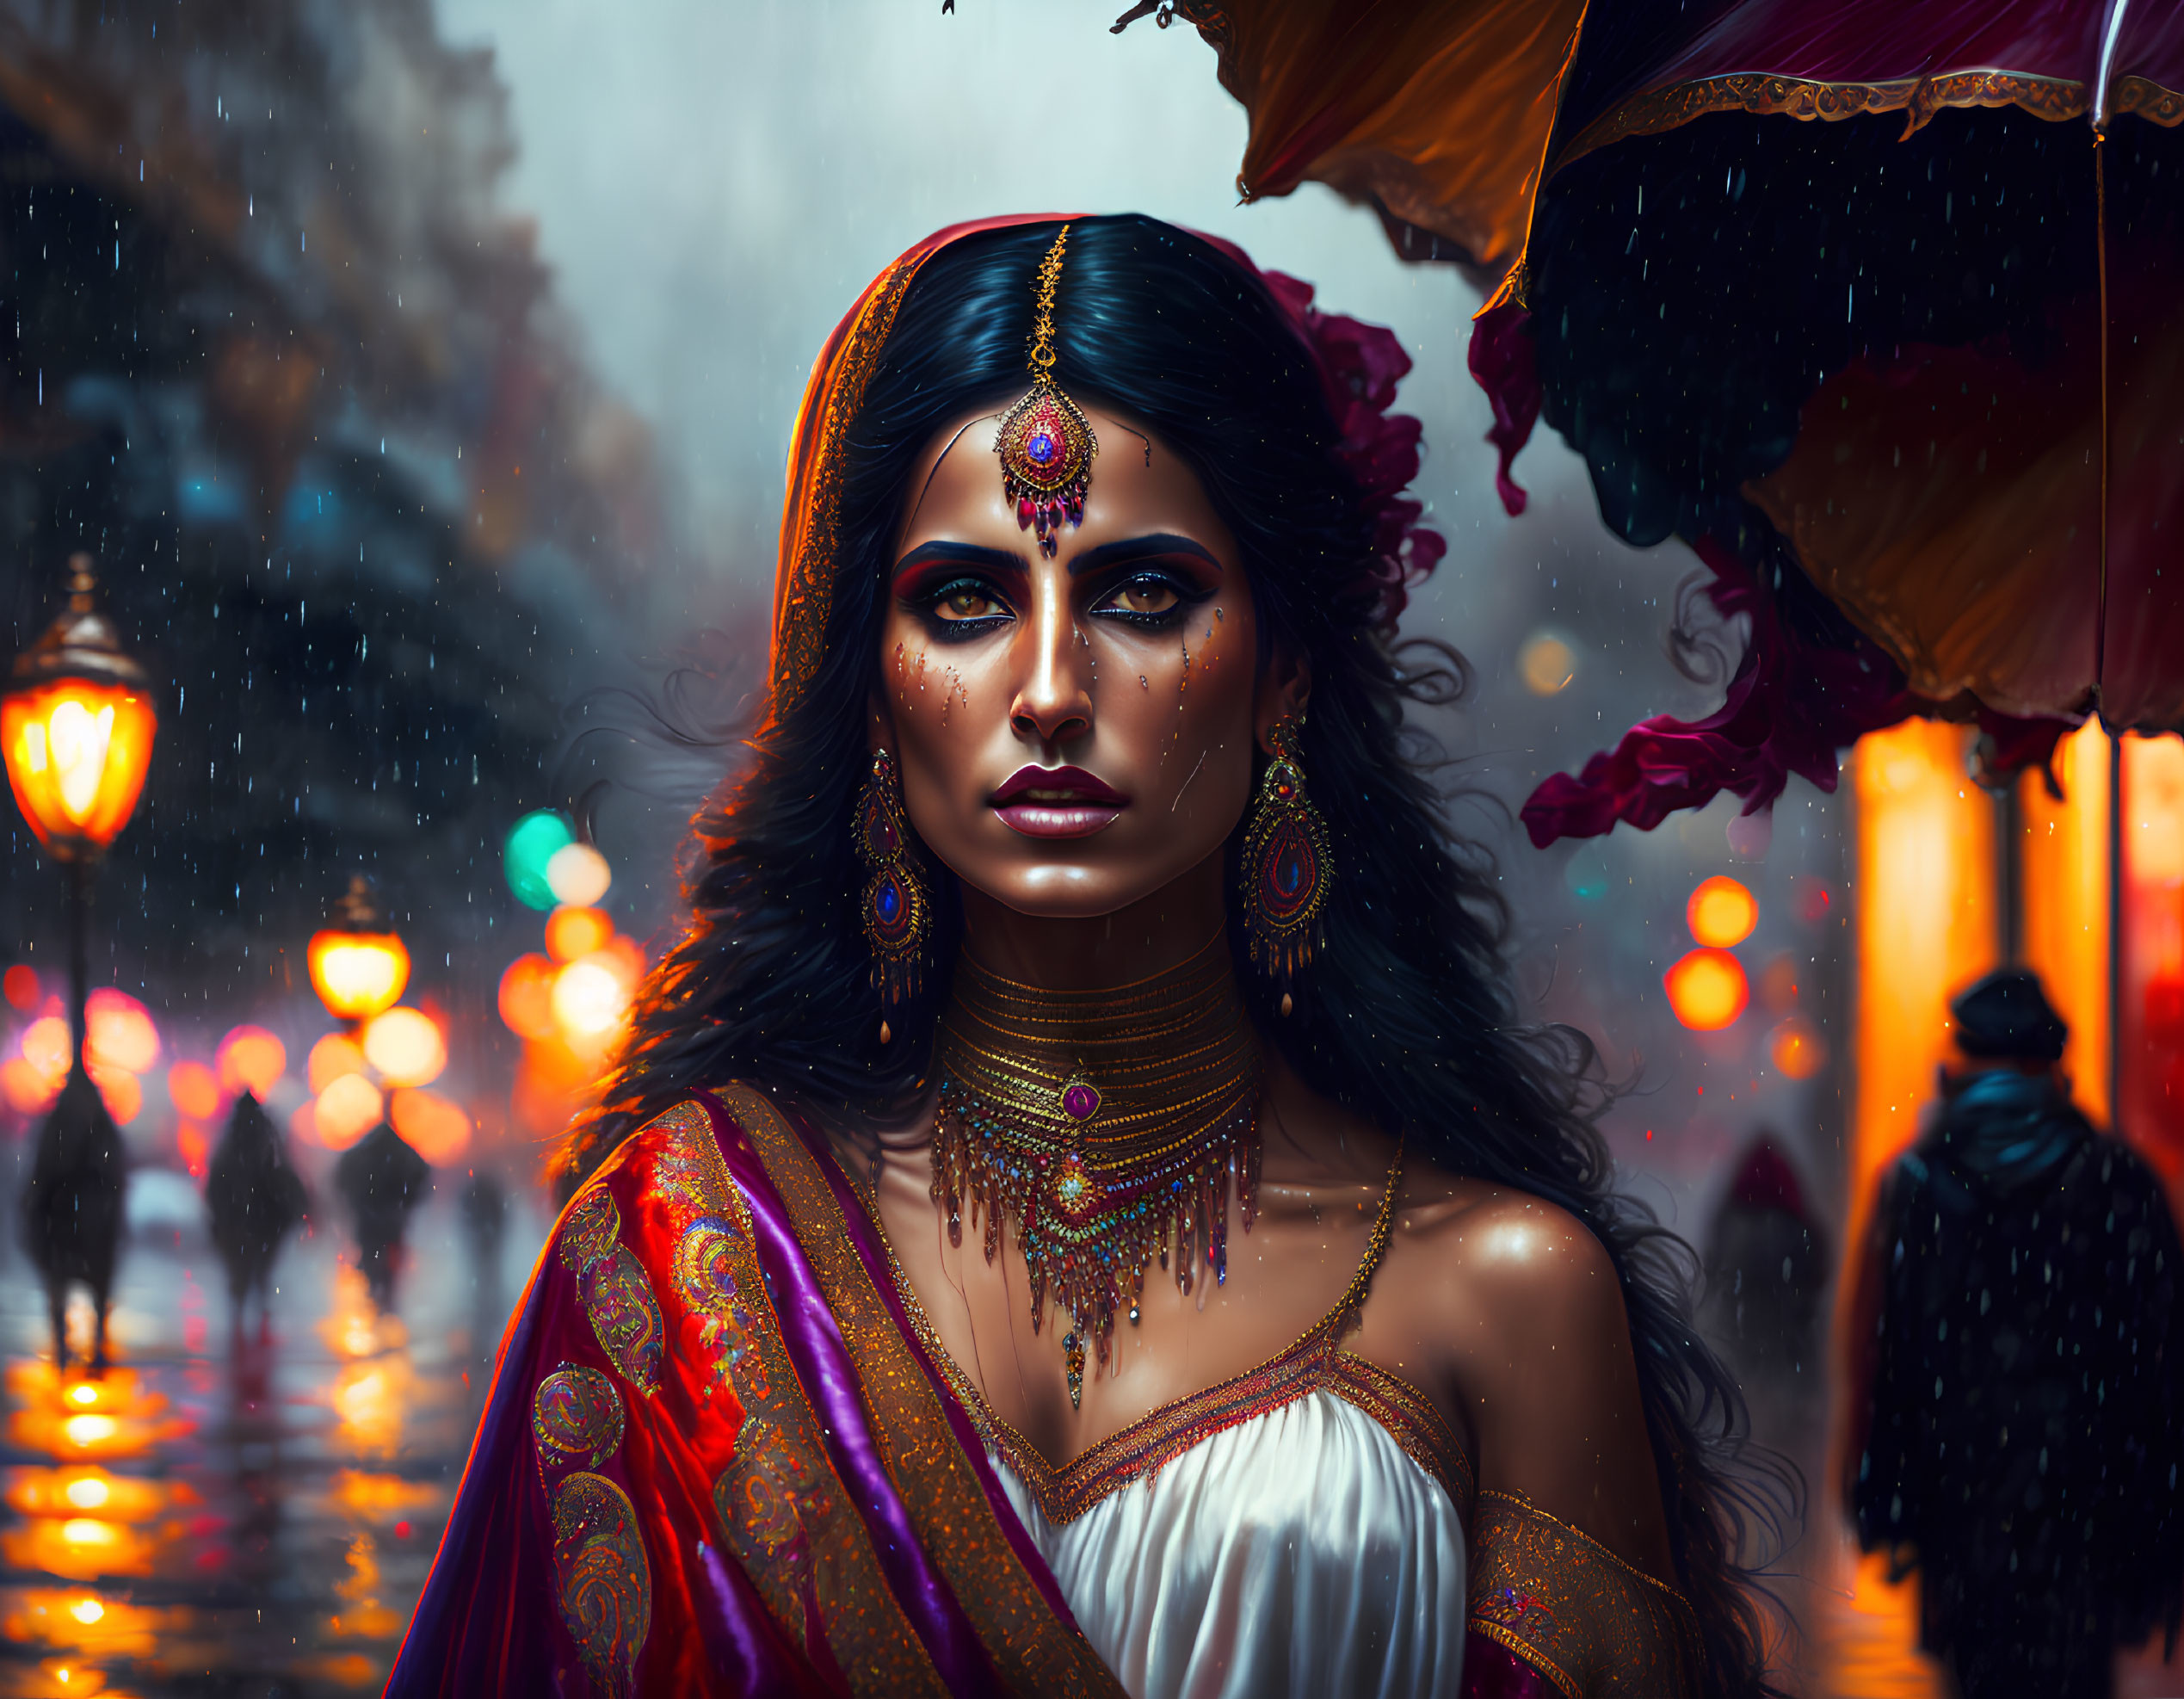 Woman in traditional Indian attire with elaborate jewelry in colorful rainy street